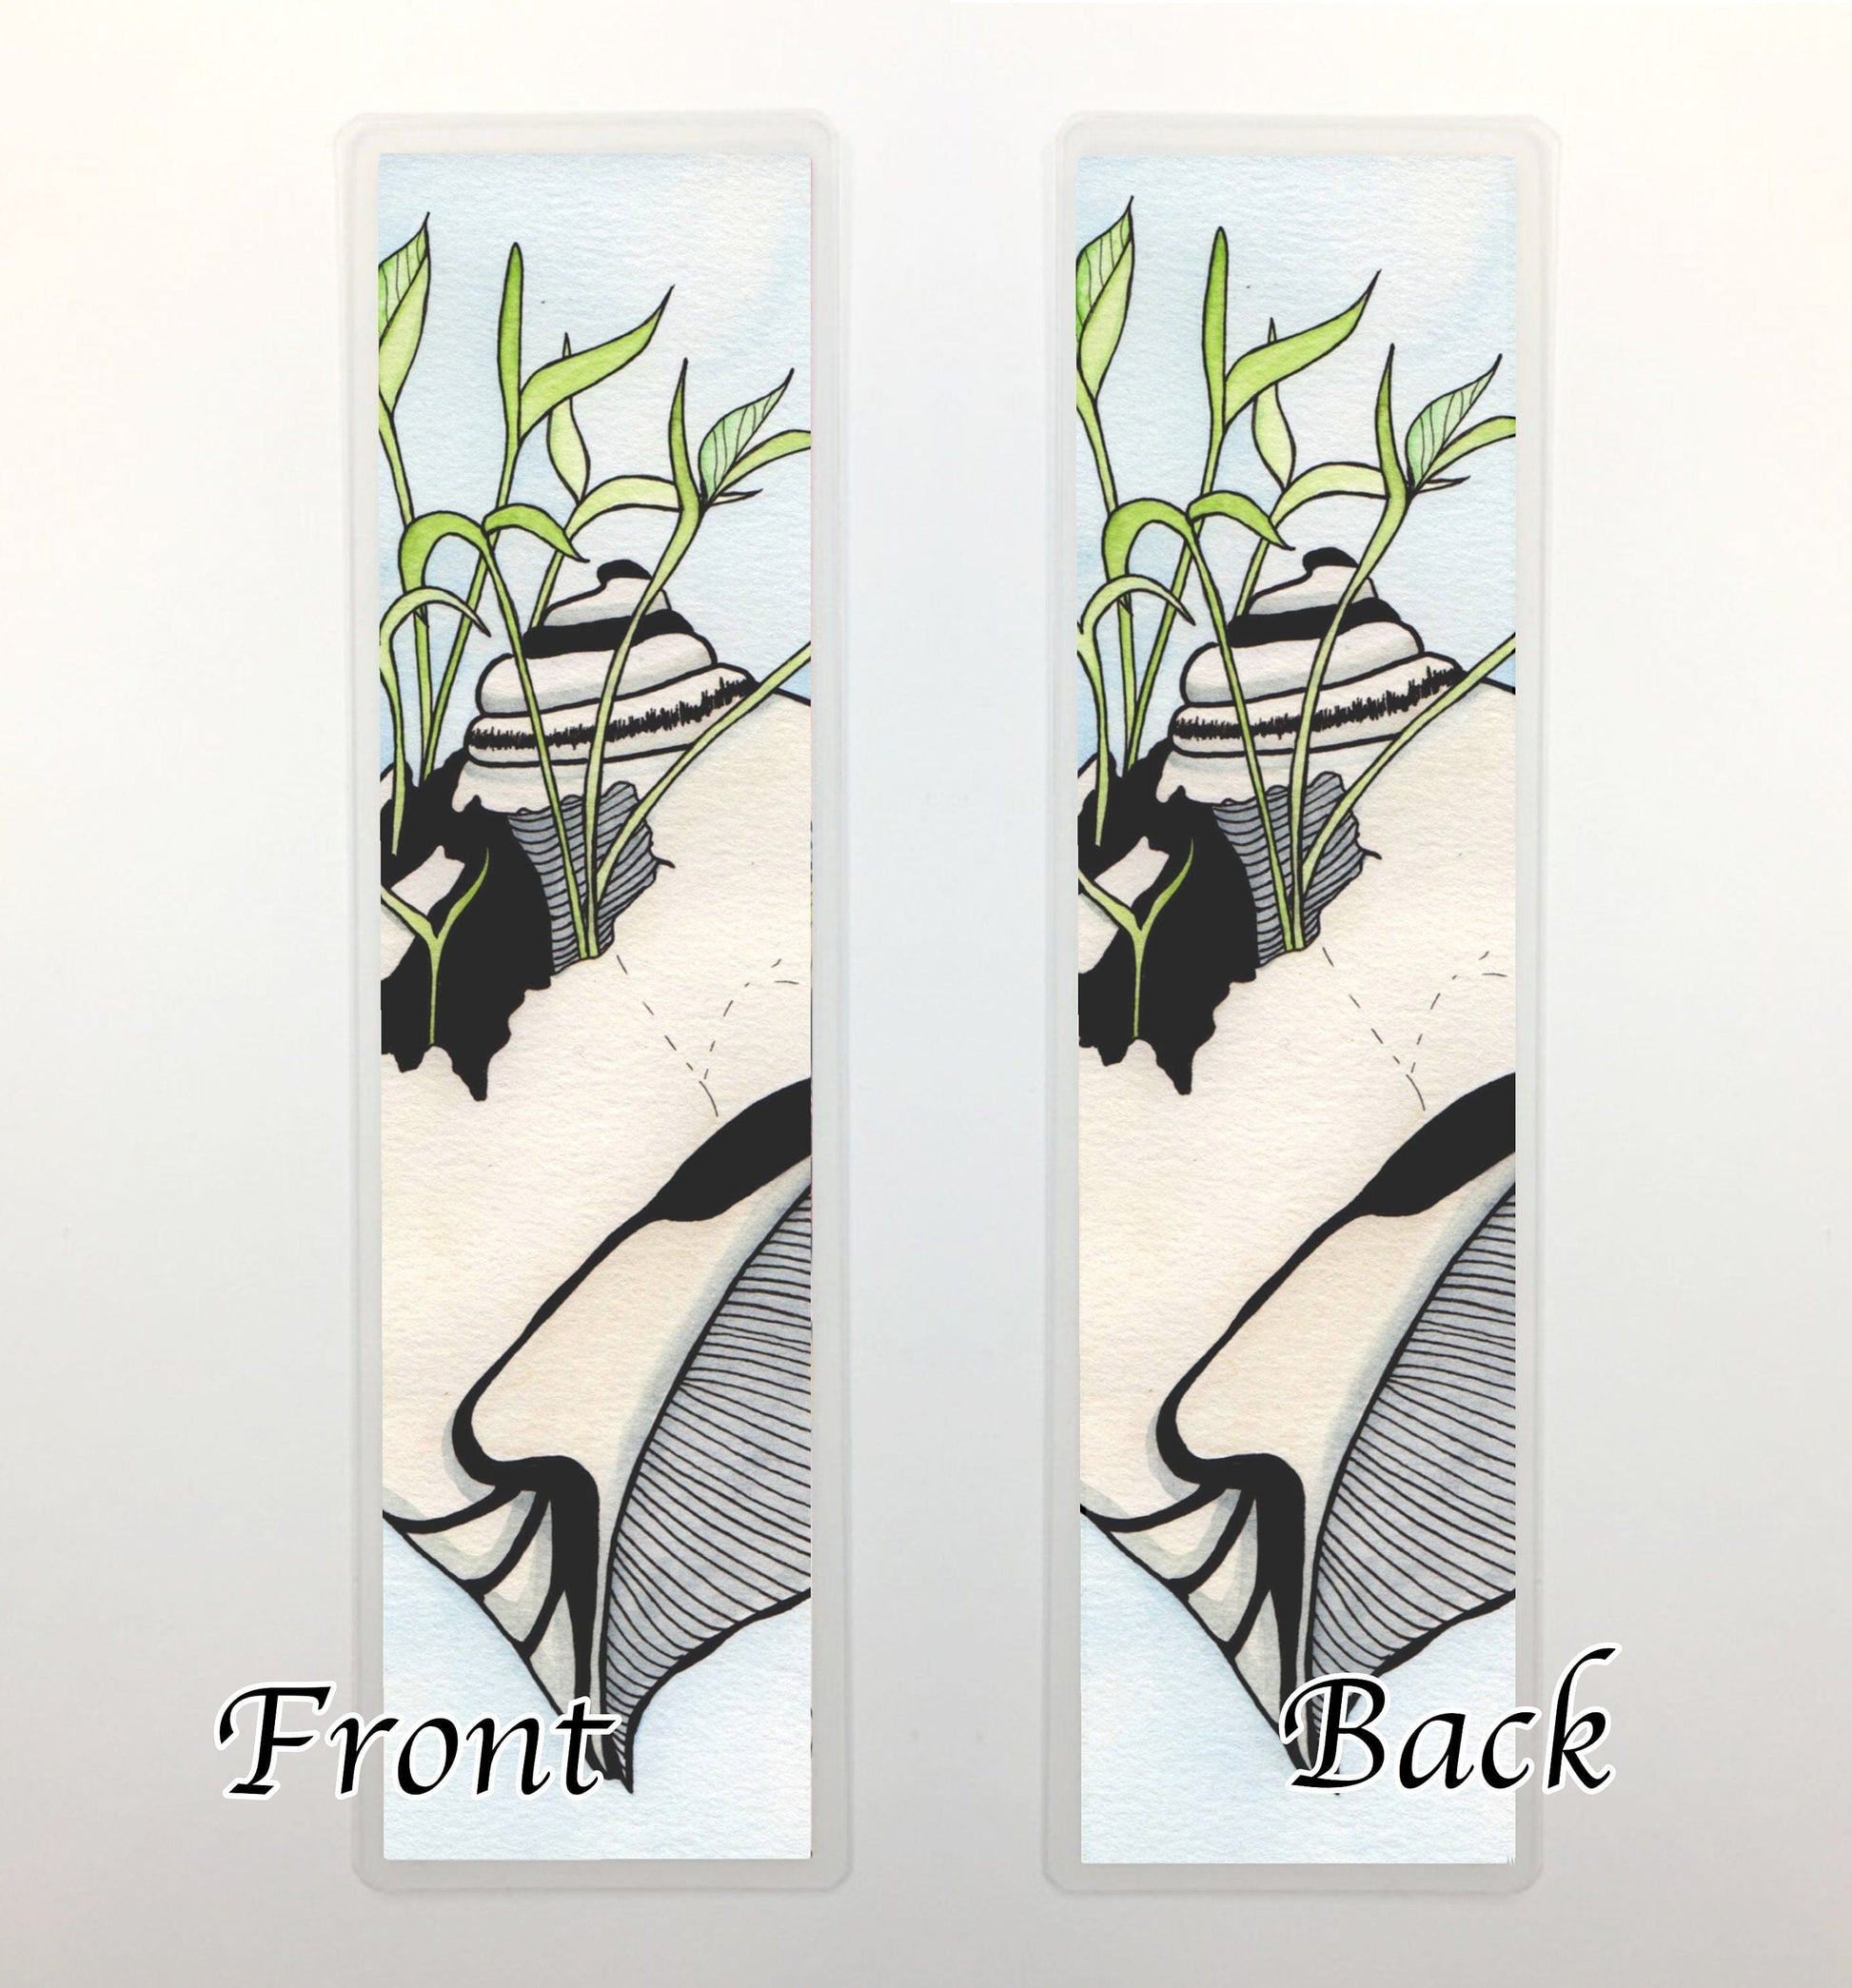 PinkPolish Design Bookmarks "Tenacious Sprout" 2-Sided Bookmark